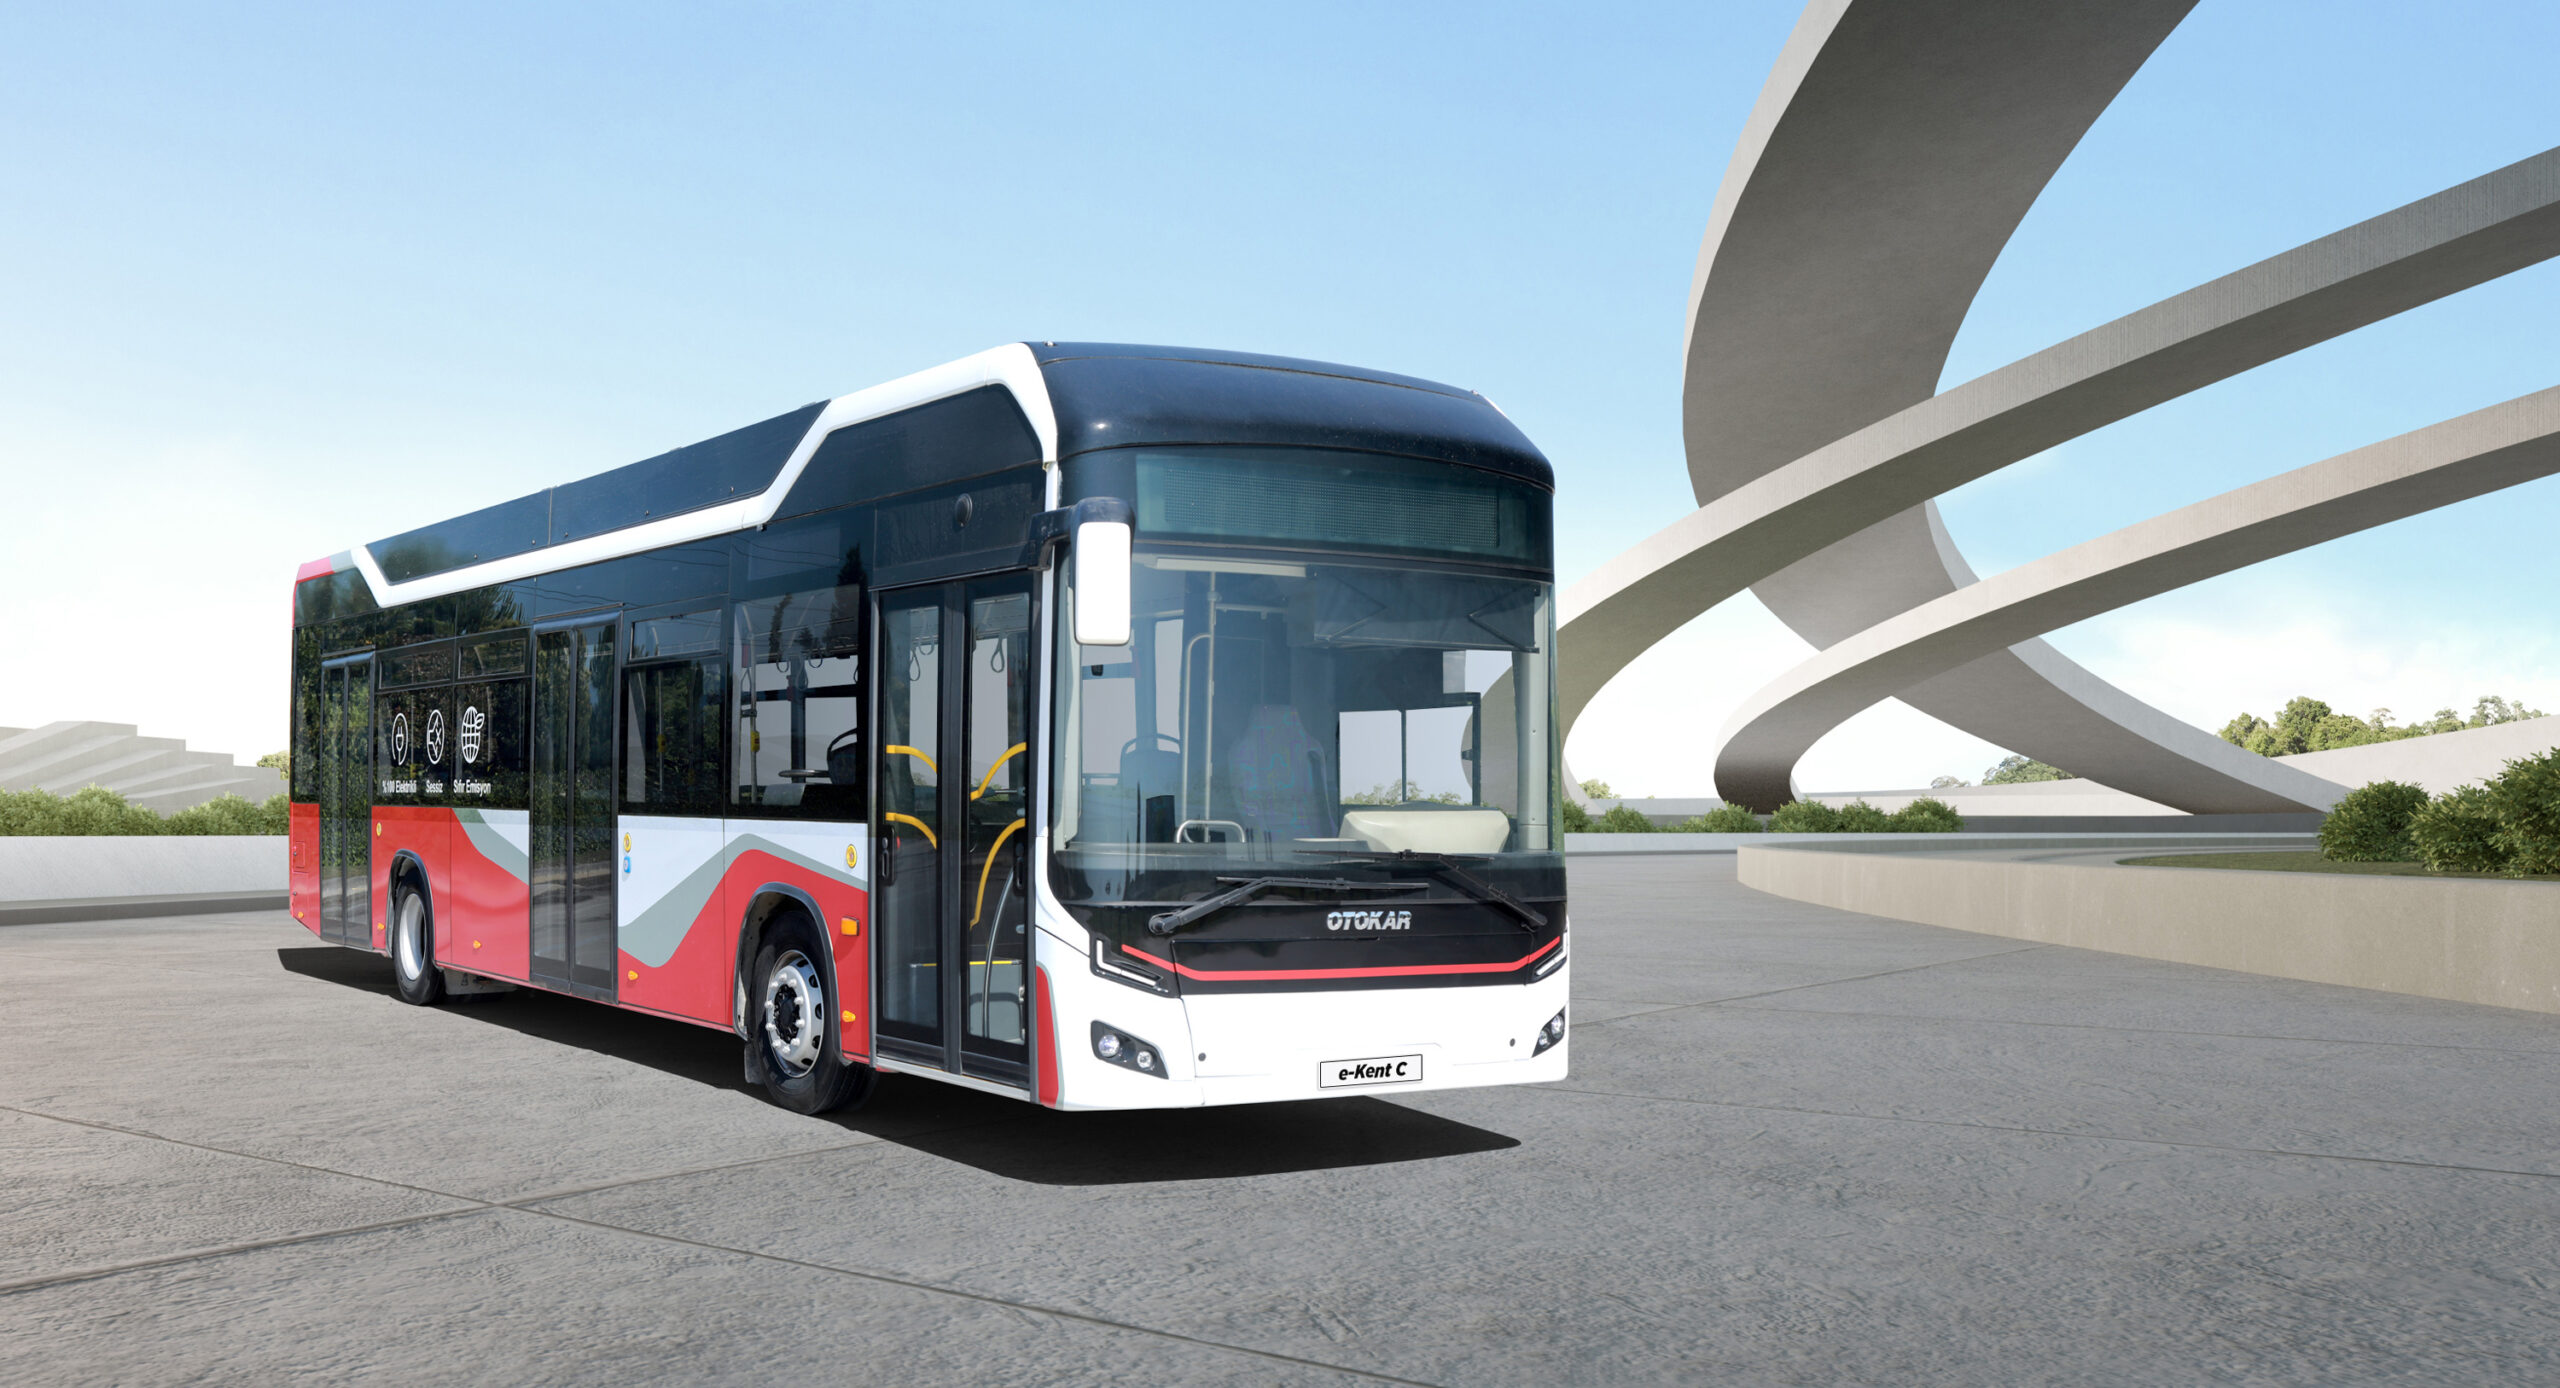 e-Kemt C electric bus from Otokar that will be showcased at IAA Mobility 2021 in Munich